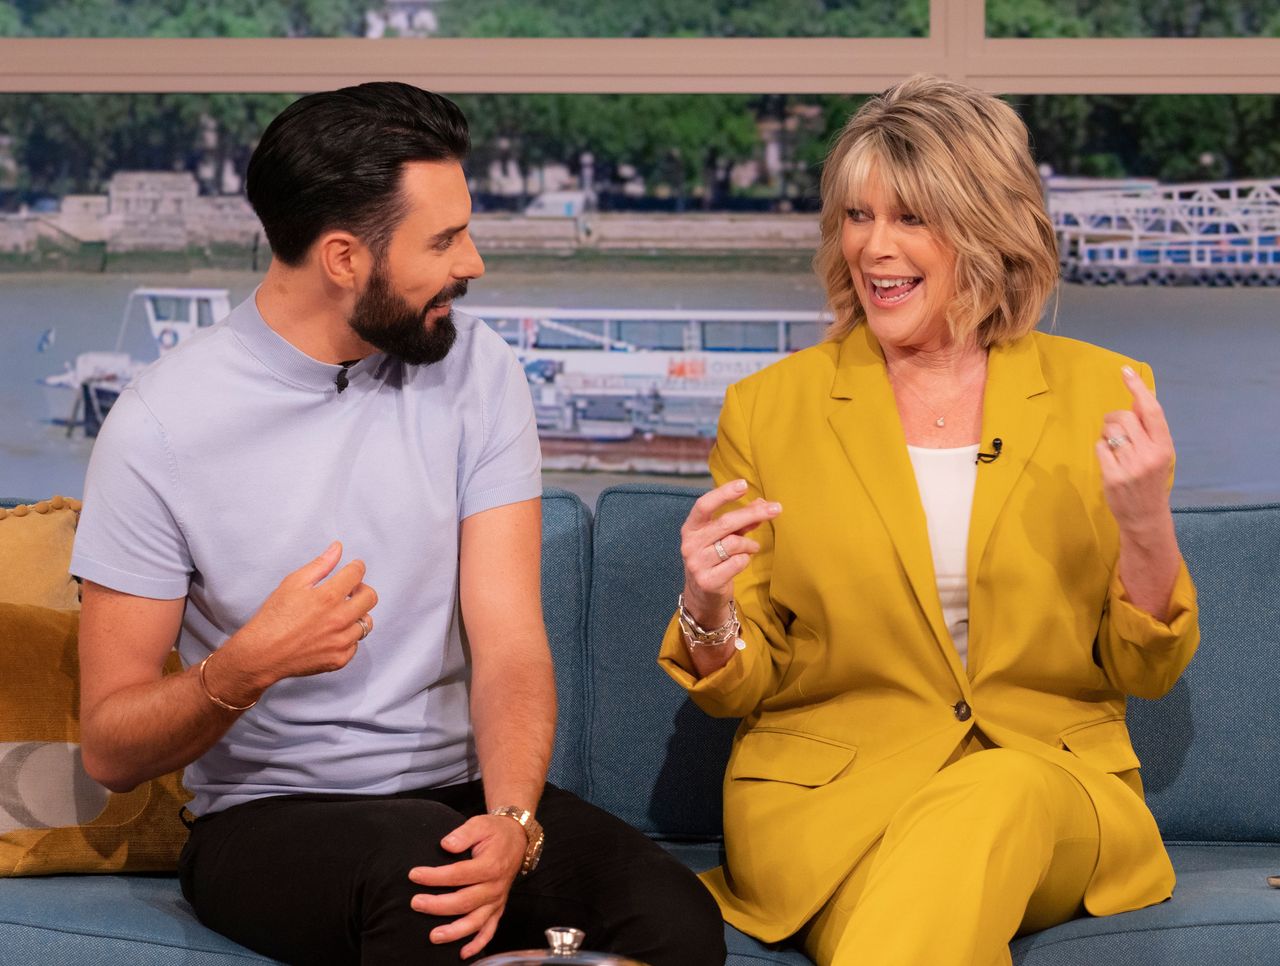 Rylan co-hosting This Morning with Ruth Langsford in August 2022